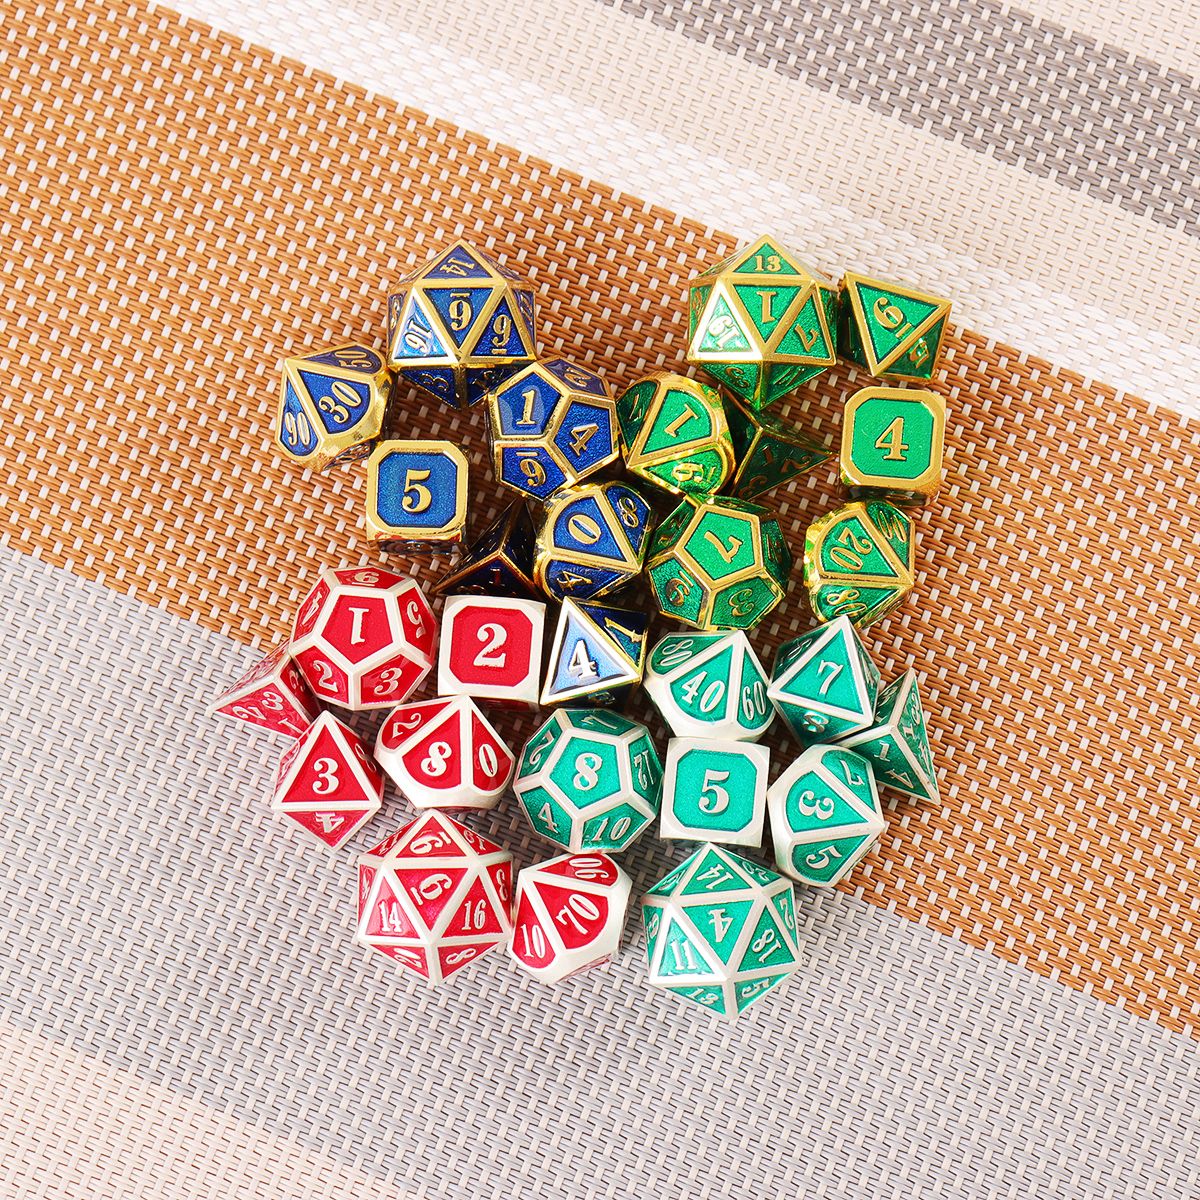 7Pcs-Heavy-Duty-Metal-Polyhedral-Dices-Set-Multisided-Dice-Antique-RPG-Role-Playing-Game-Dices-1371263